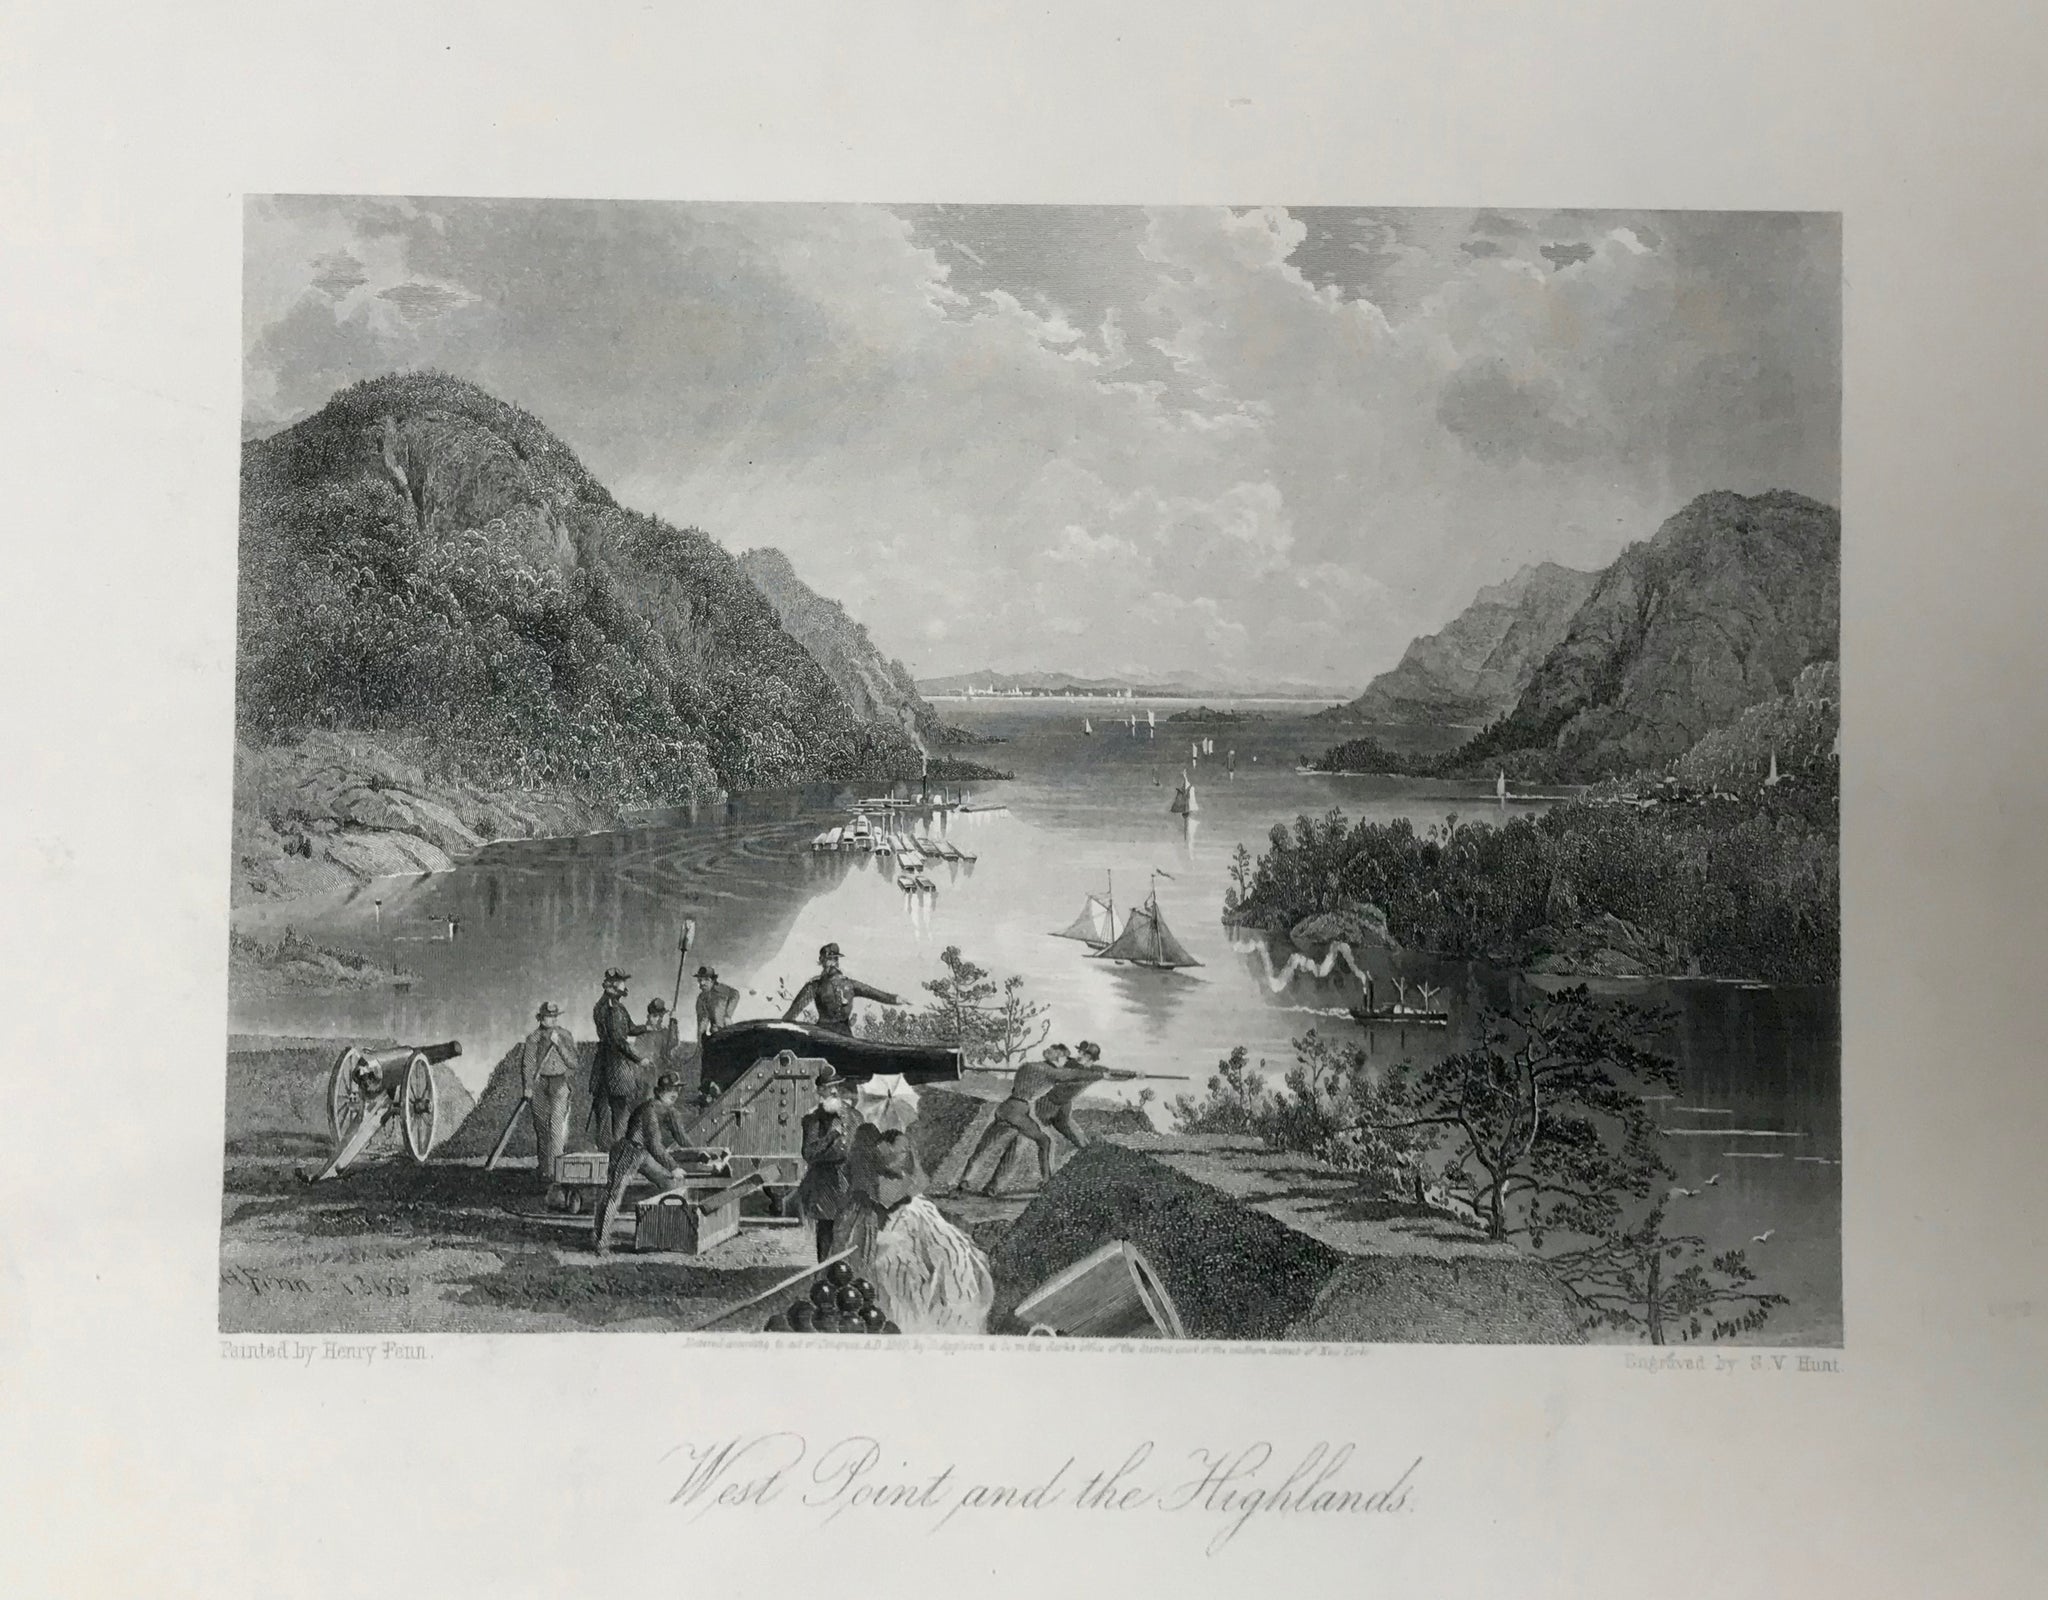 "West Point and the Highlands"  Steel engraving by S.V. Hunt after a painting by Henry Fenn, dated 1869.